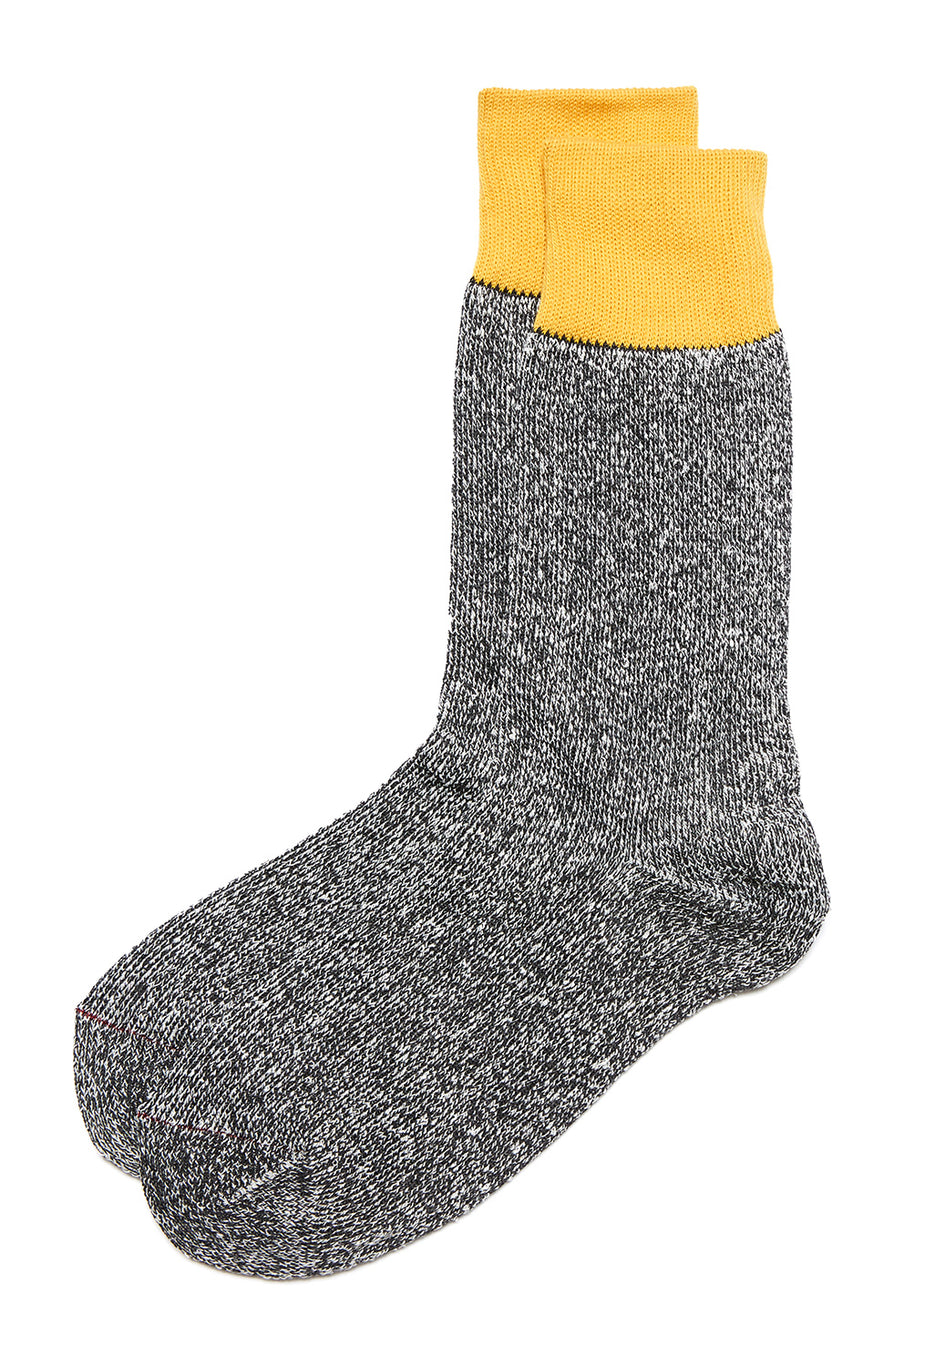 ROTOTO Double Face Silk and Cotton Socks 1